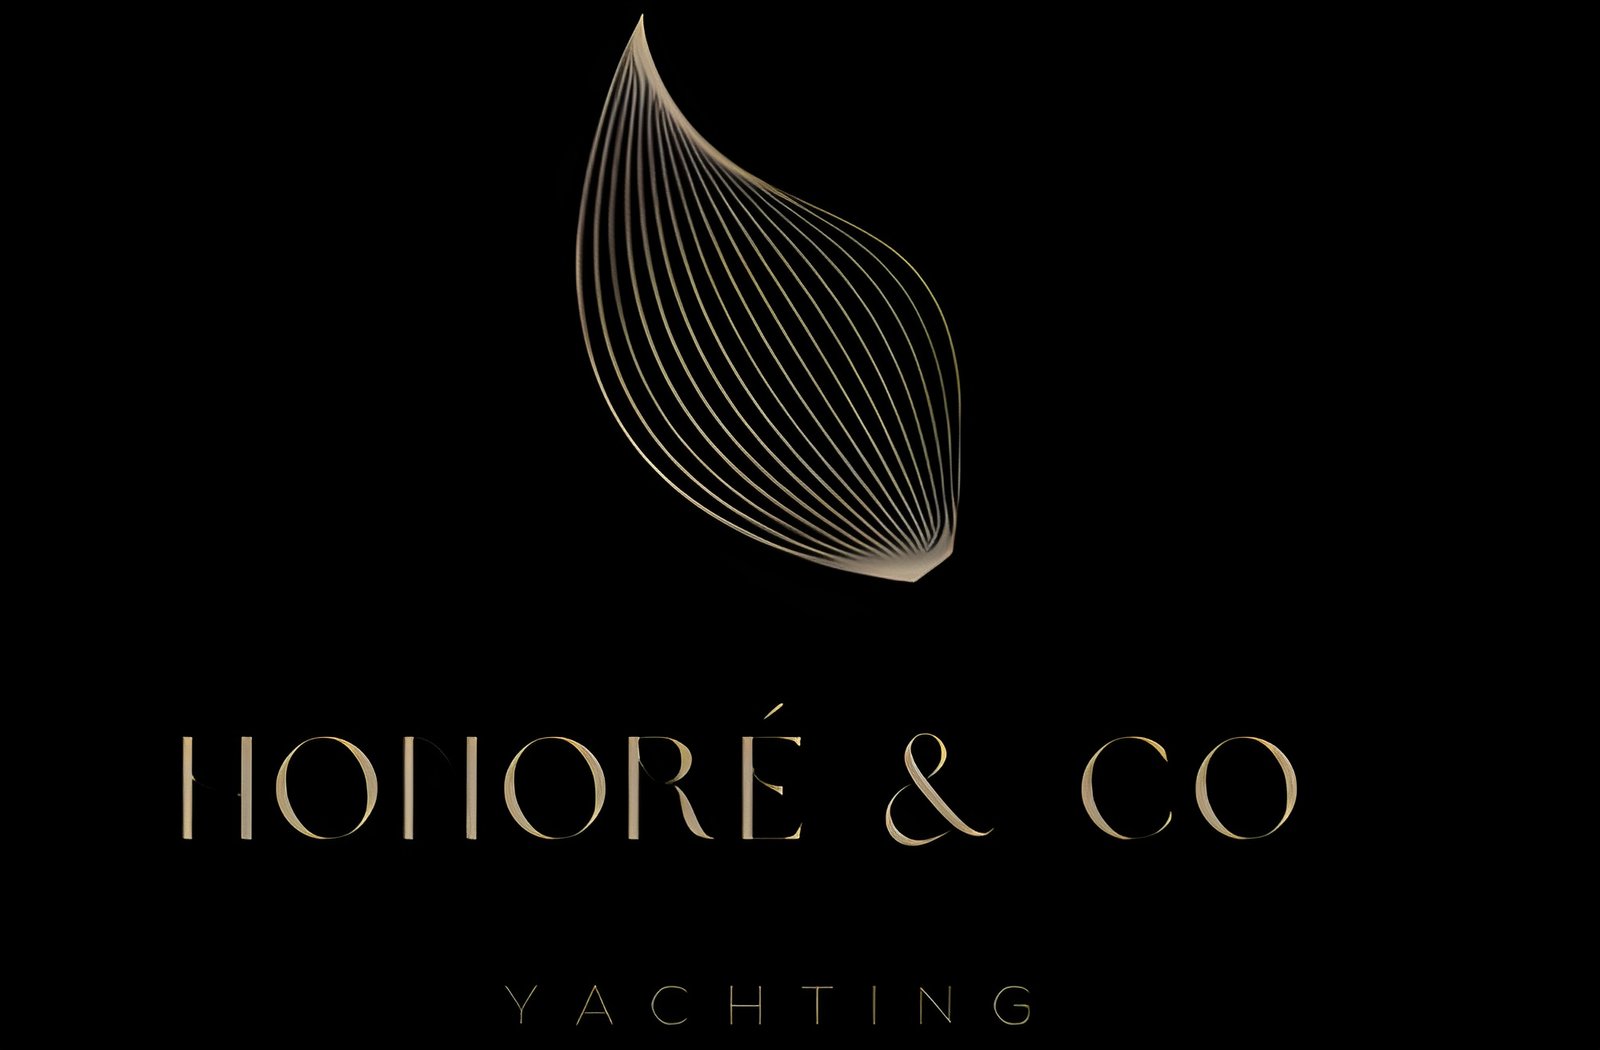 Honoré & Co Yachting